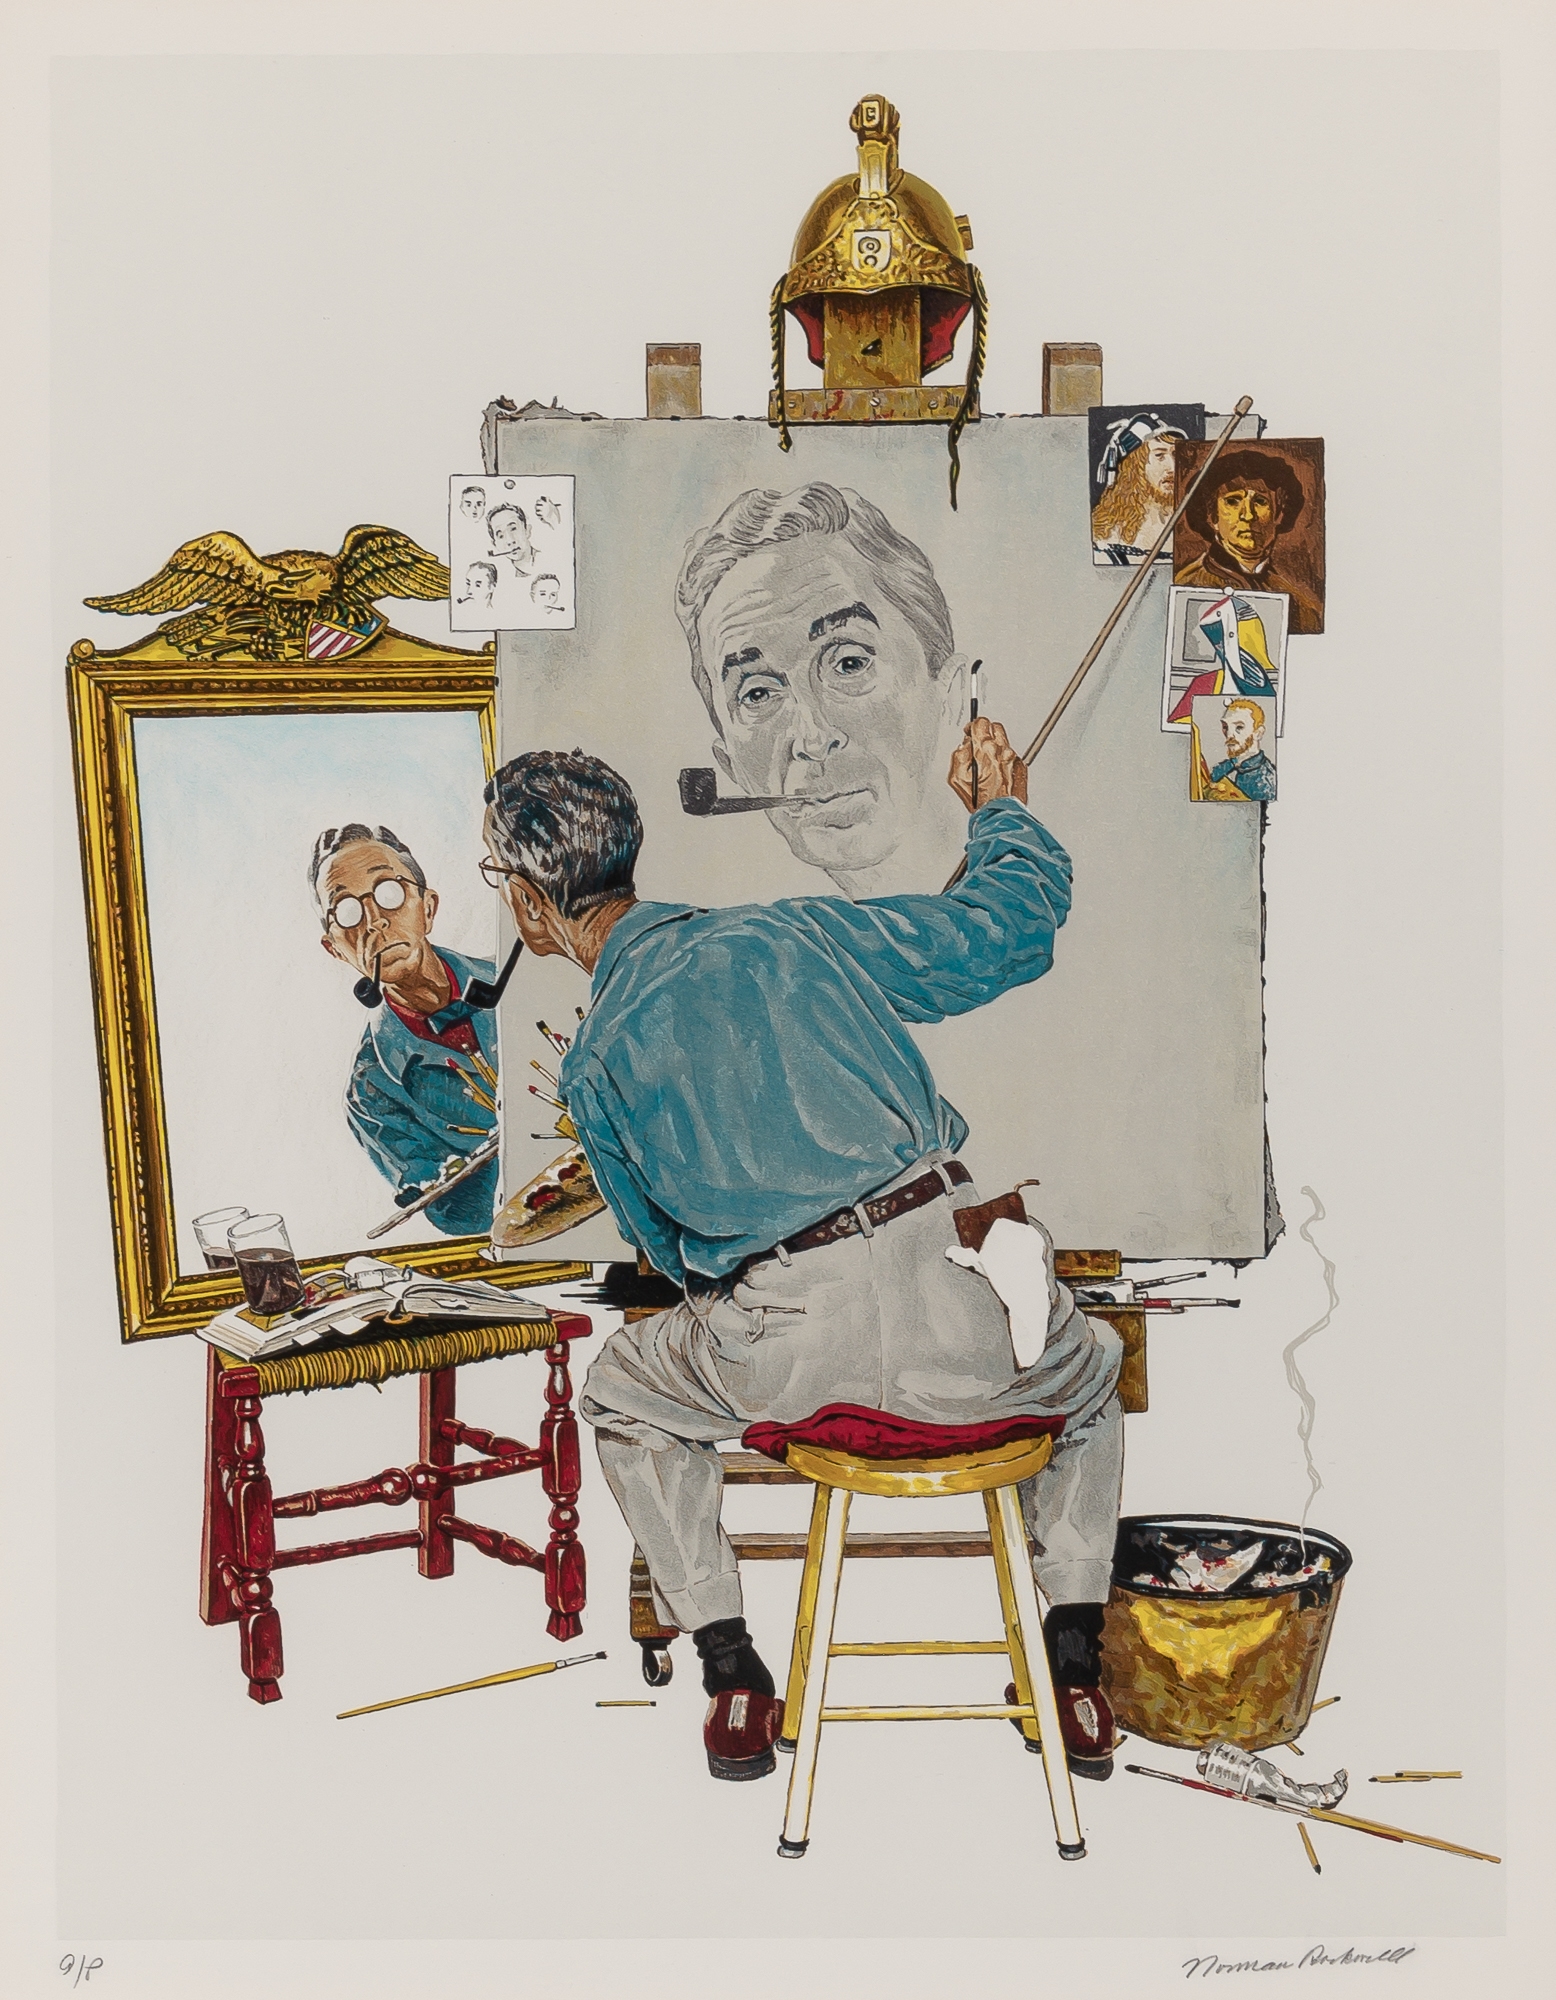 Artwork by Norman Rockwell, TRIPLE SELF PORTRAIT, Made of Color lithograph